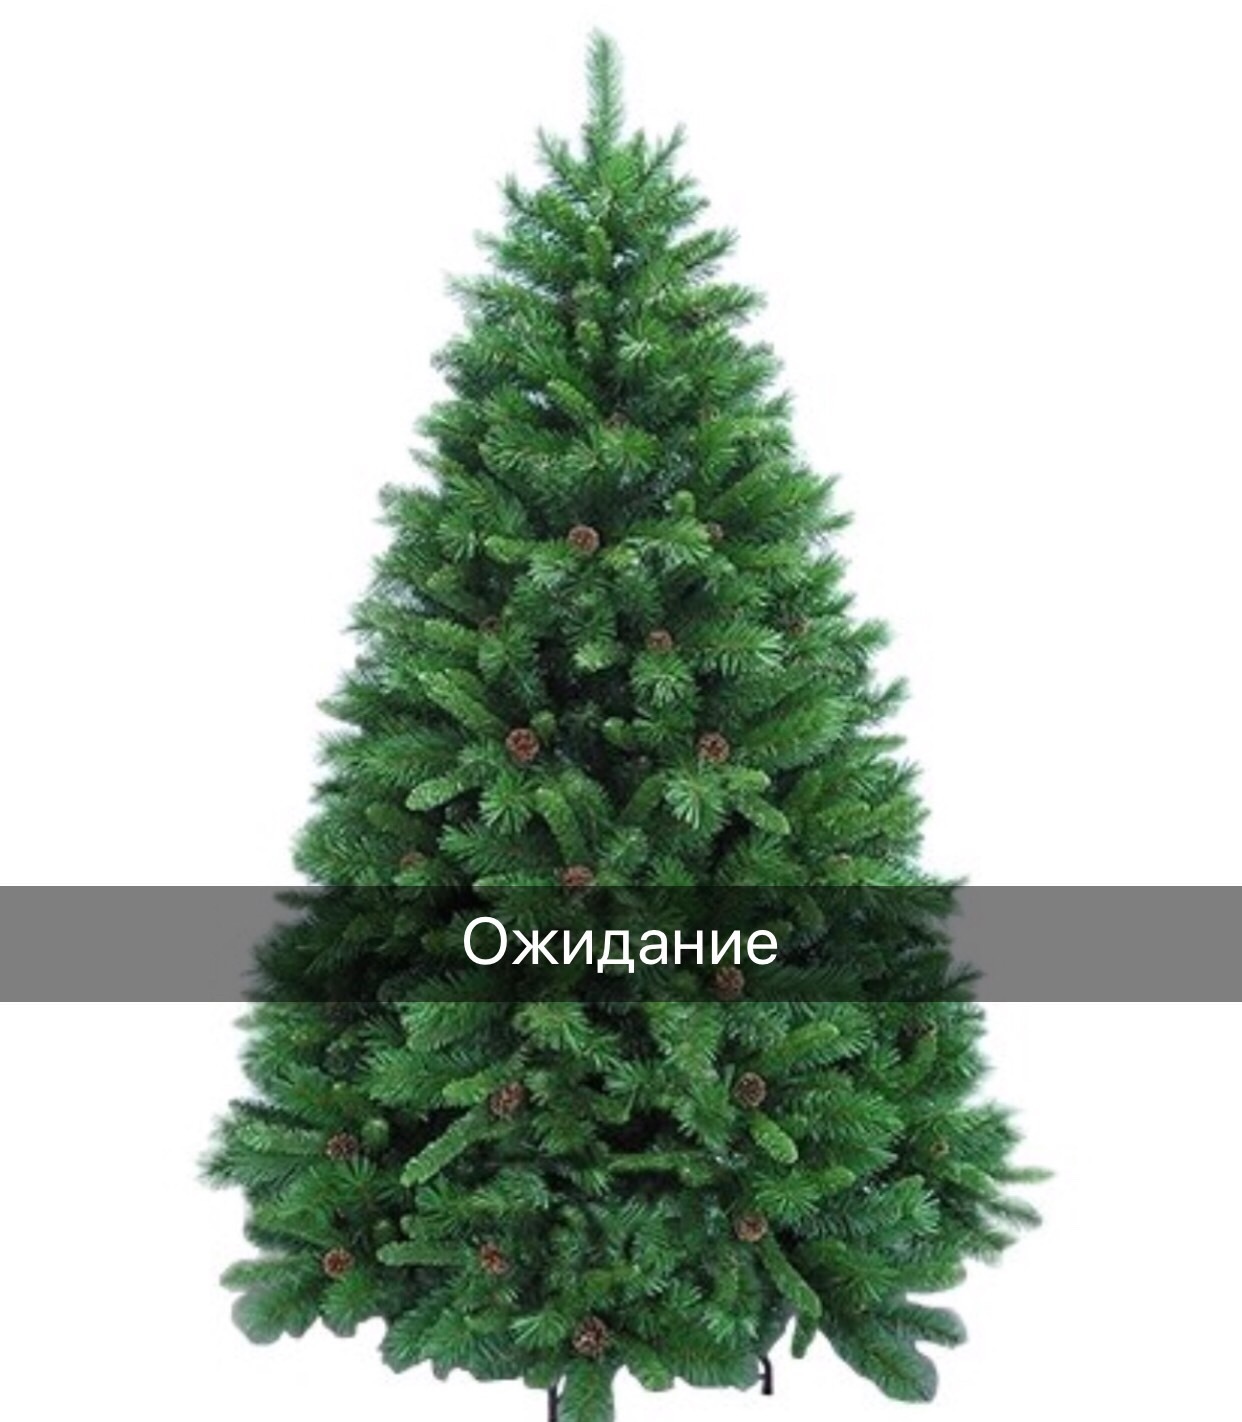 I ordered a tree here - New Year, Christmas trees, Expectation and reality, Longpost